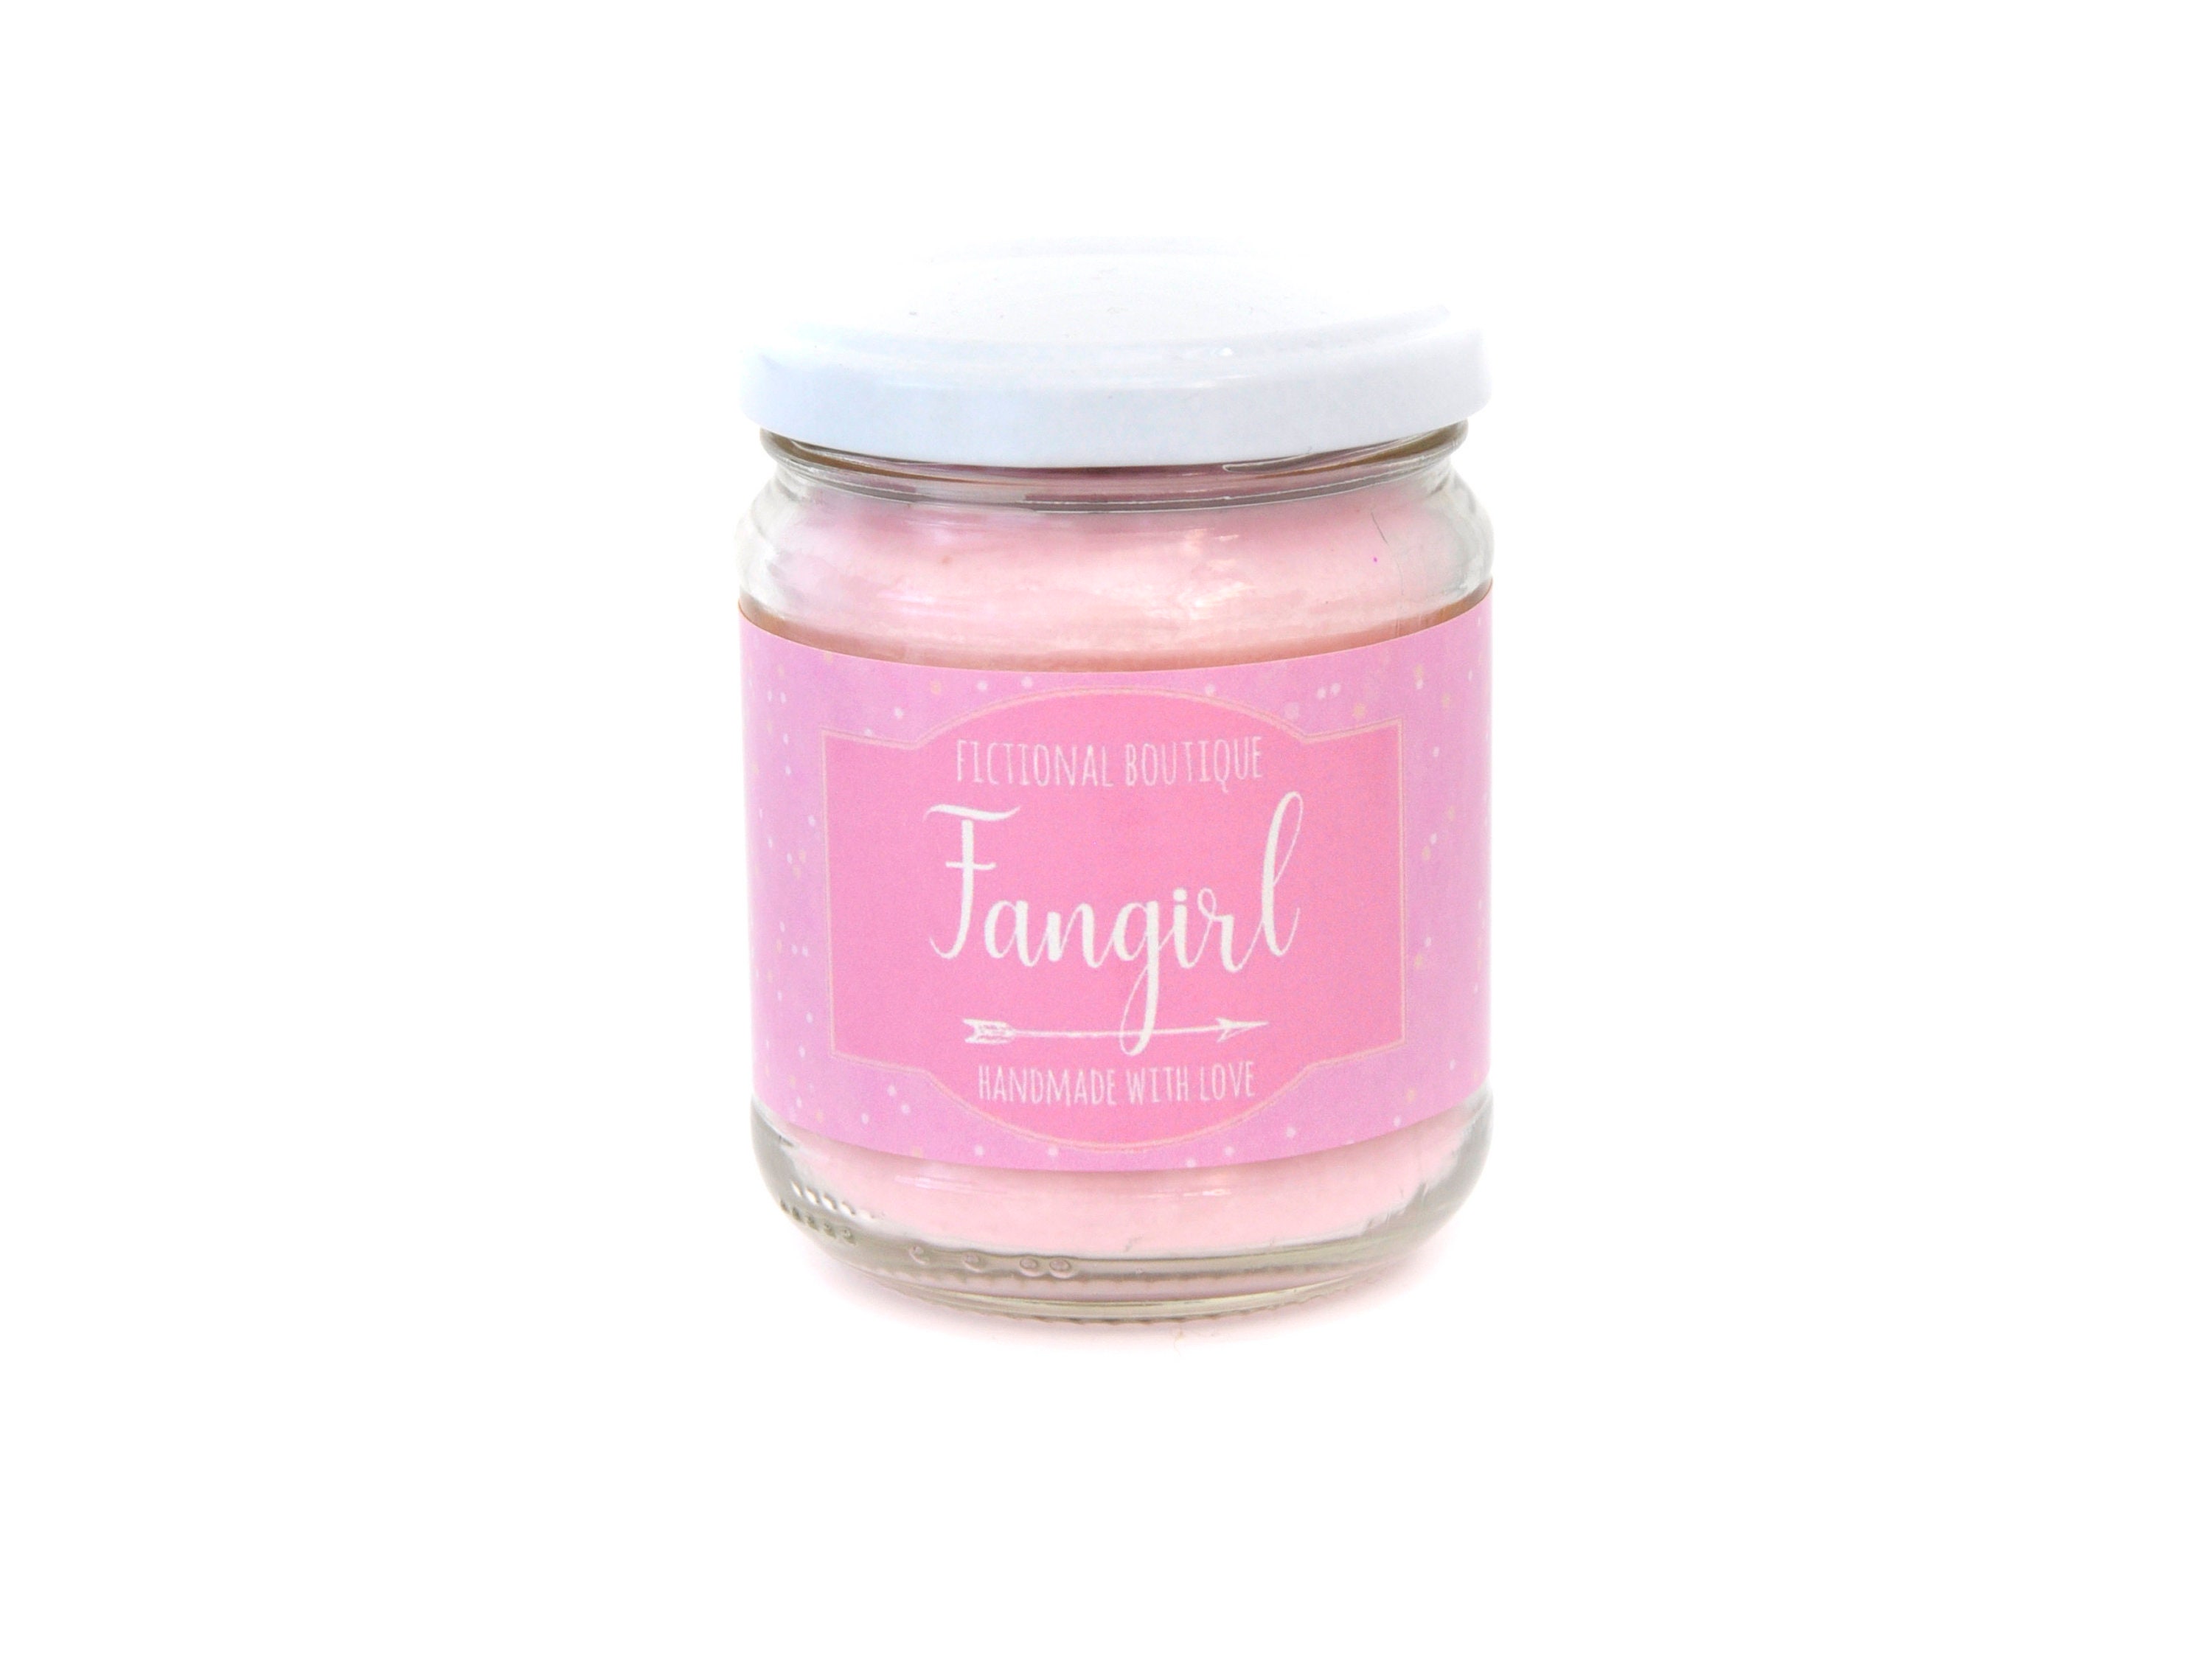 Fangirl Bookish Candle, Palm Wax Hand Poured Merch, Gift, Vegan